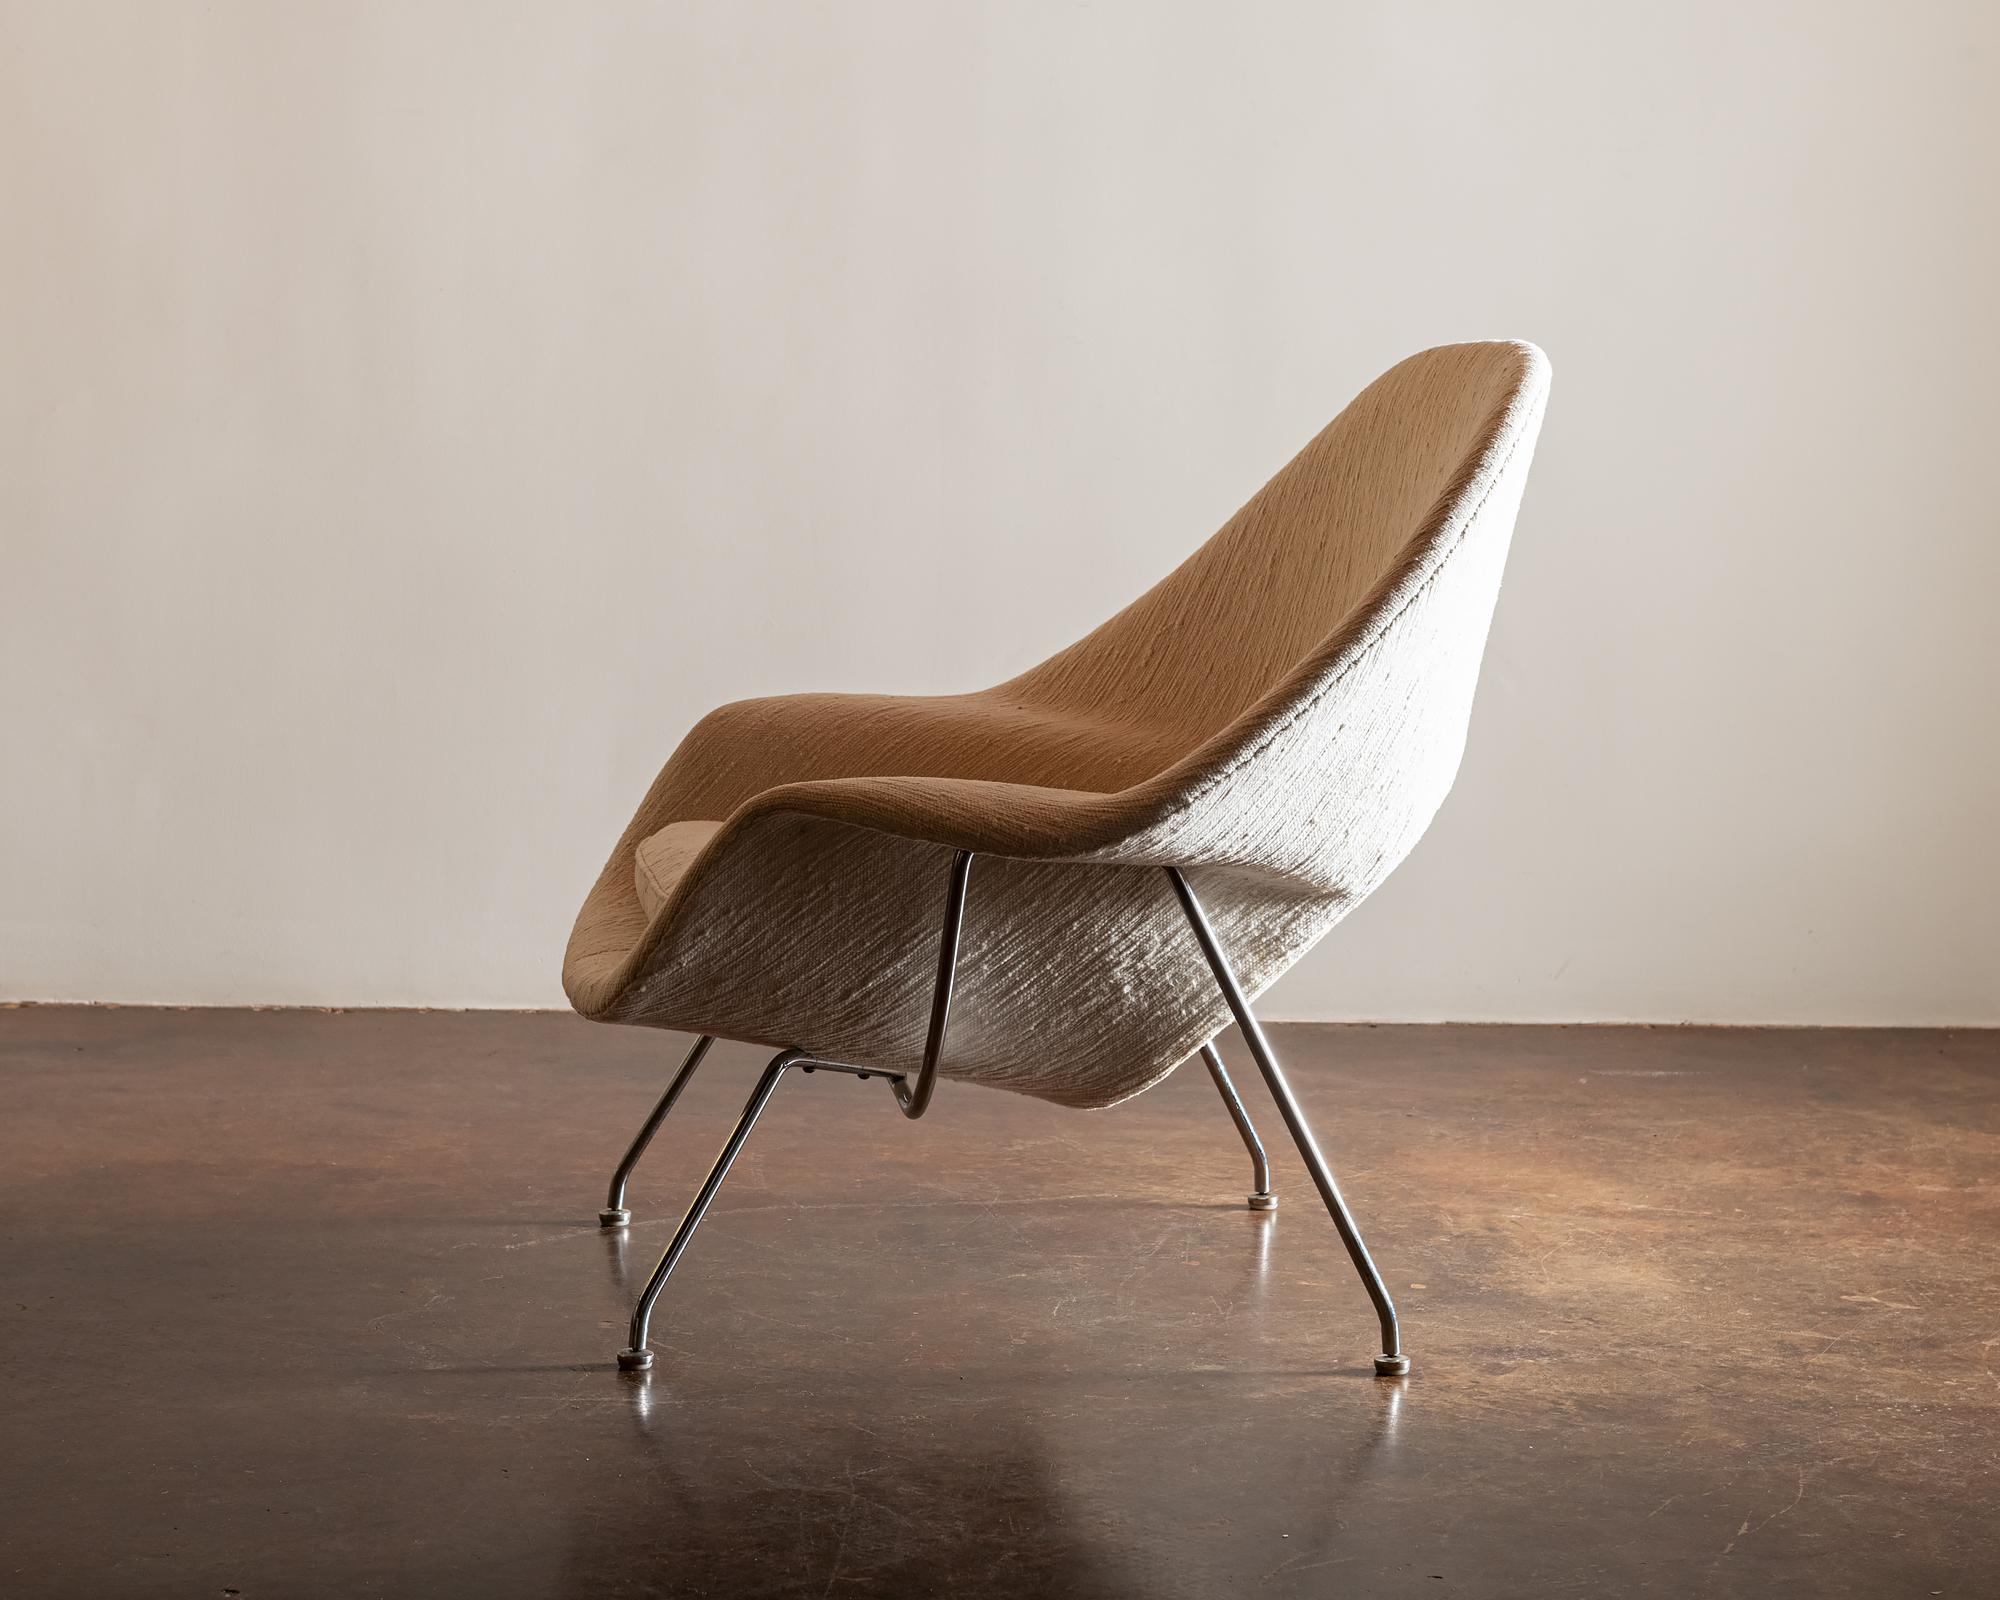 Steel Iconic Womb Chair and Ottoman by Eero Saarinen for Knoll, United States, 1960s